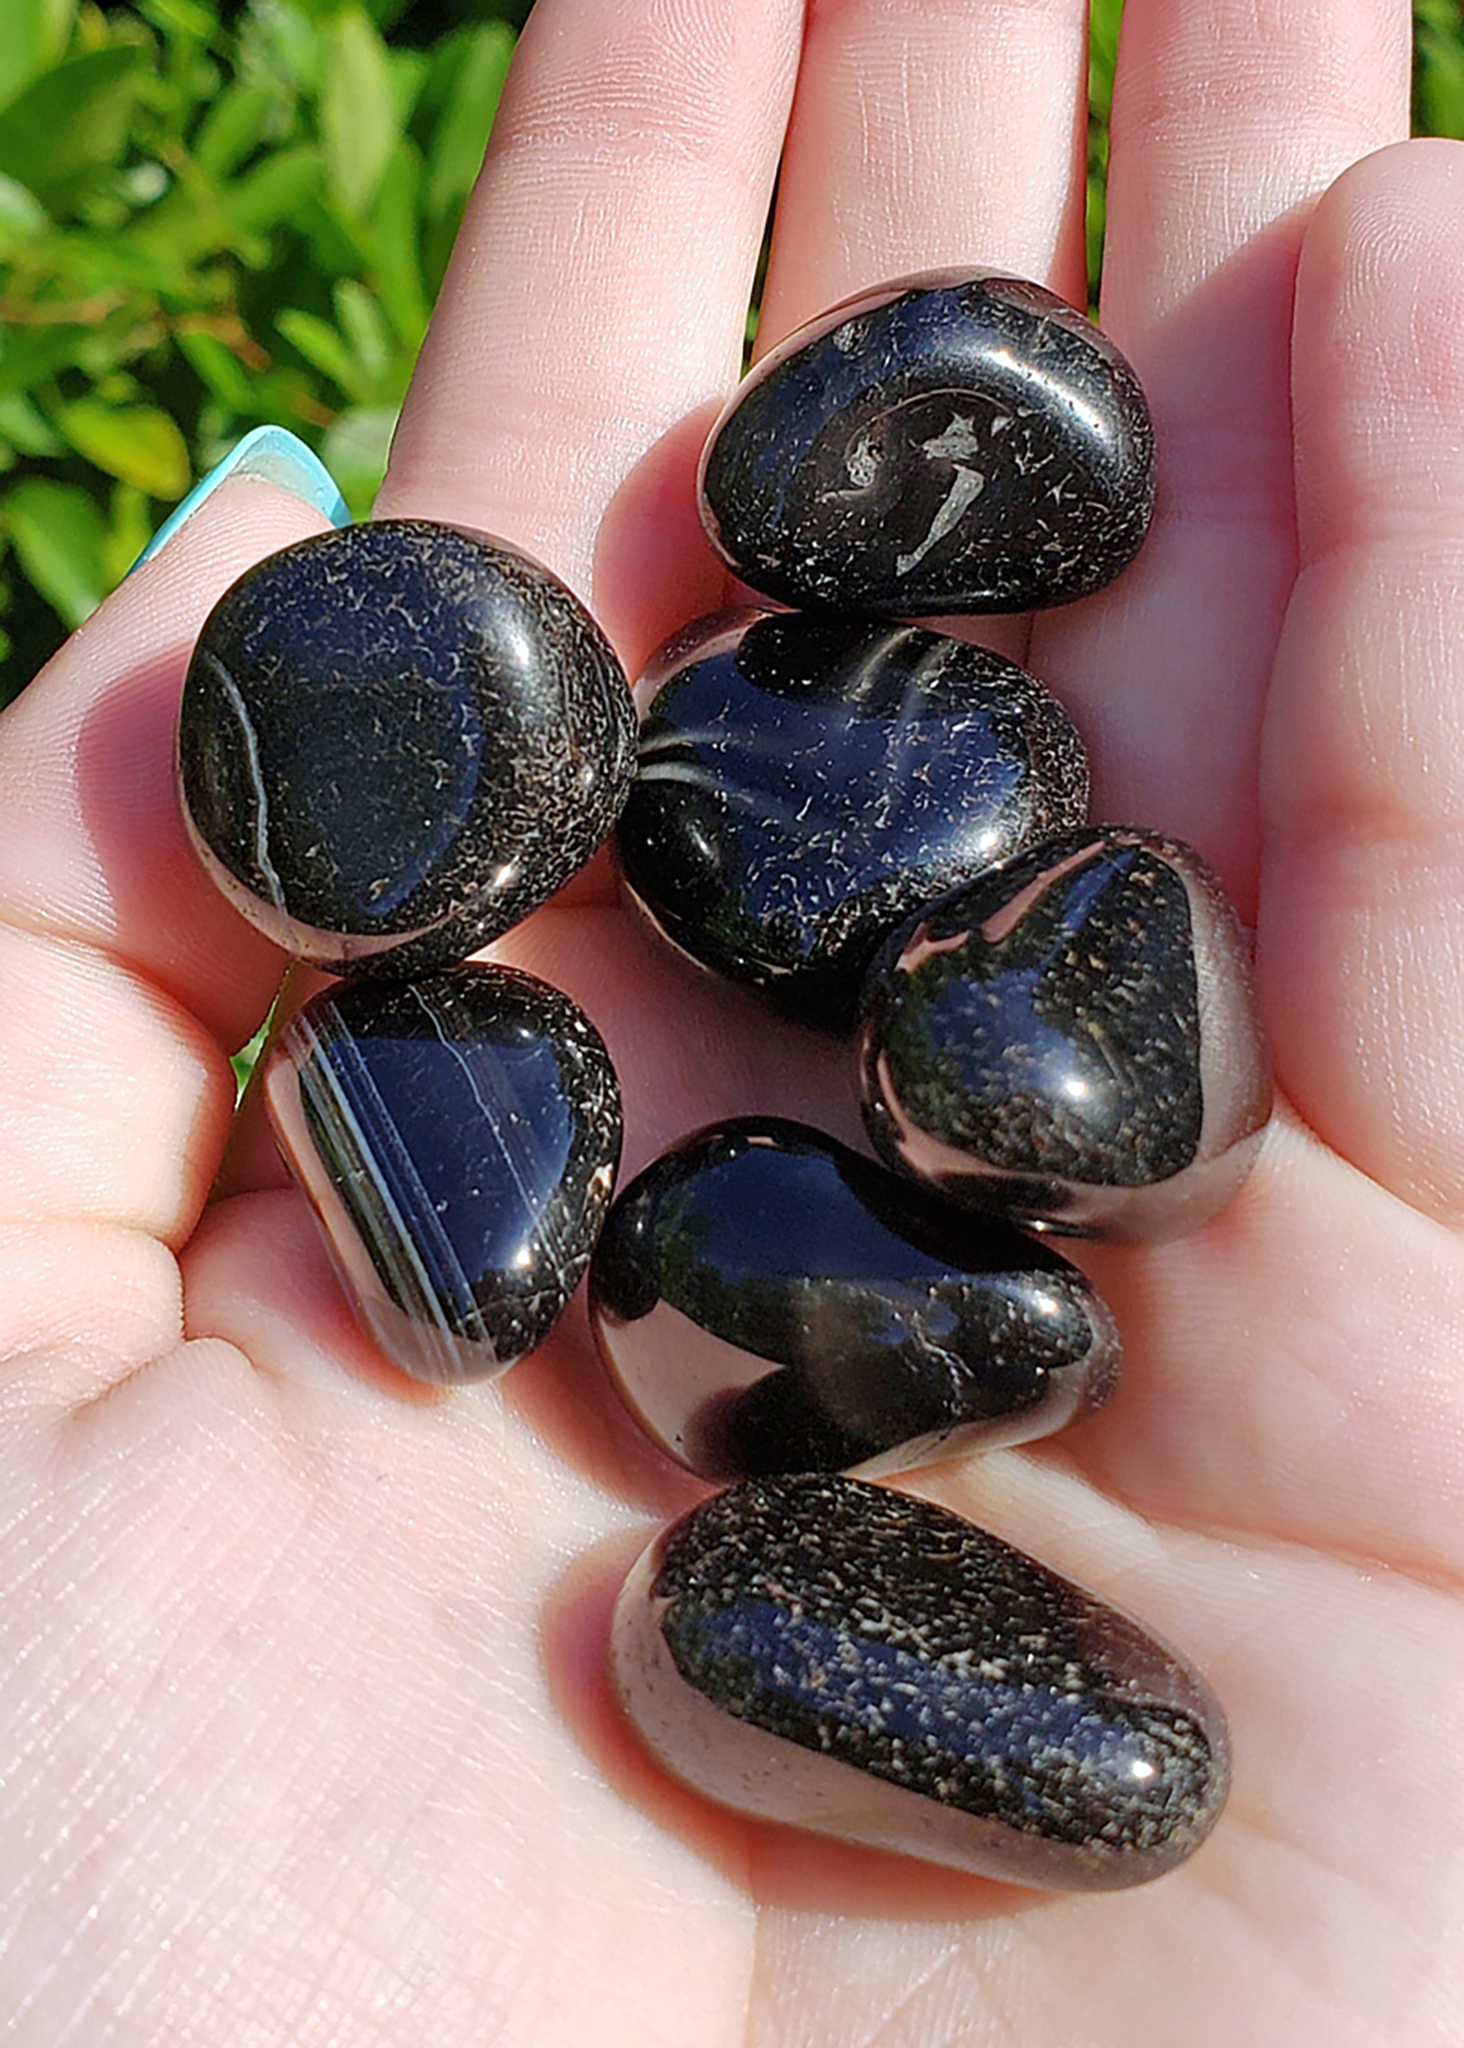 Black Onyx Natural Tumbled Gemstone - Stone of Focus and Calm - 0.4&quot; - 0.8&quot;